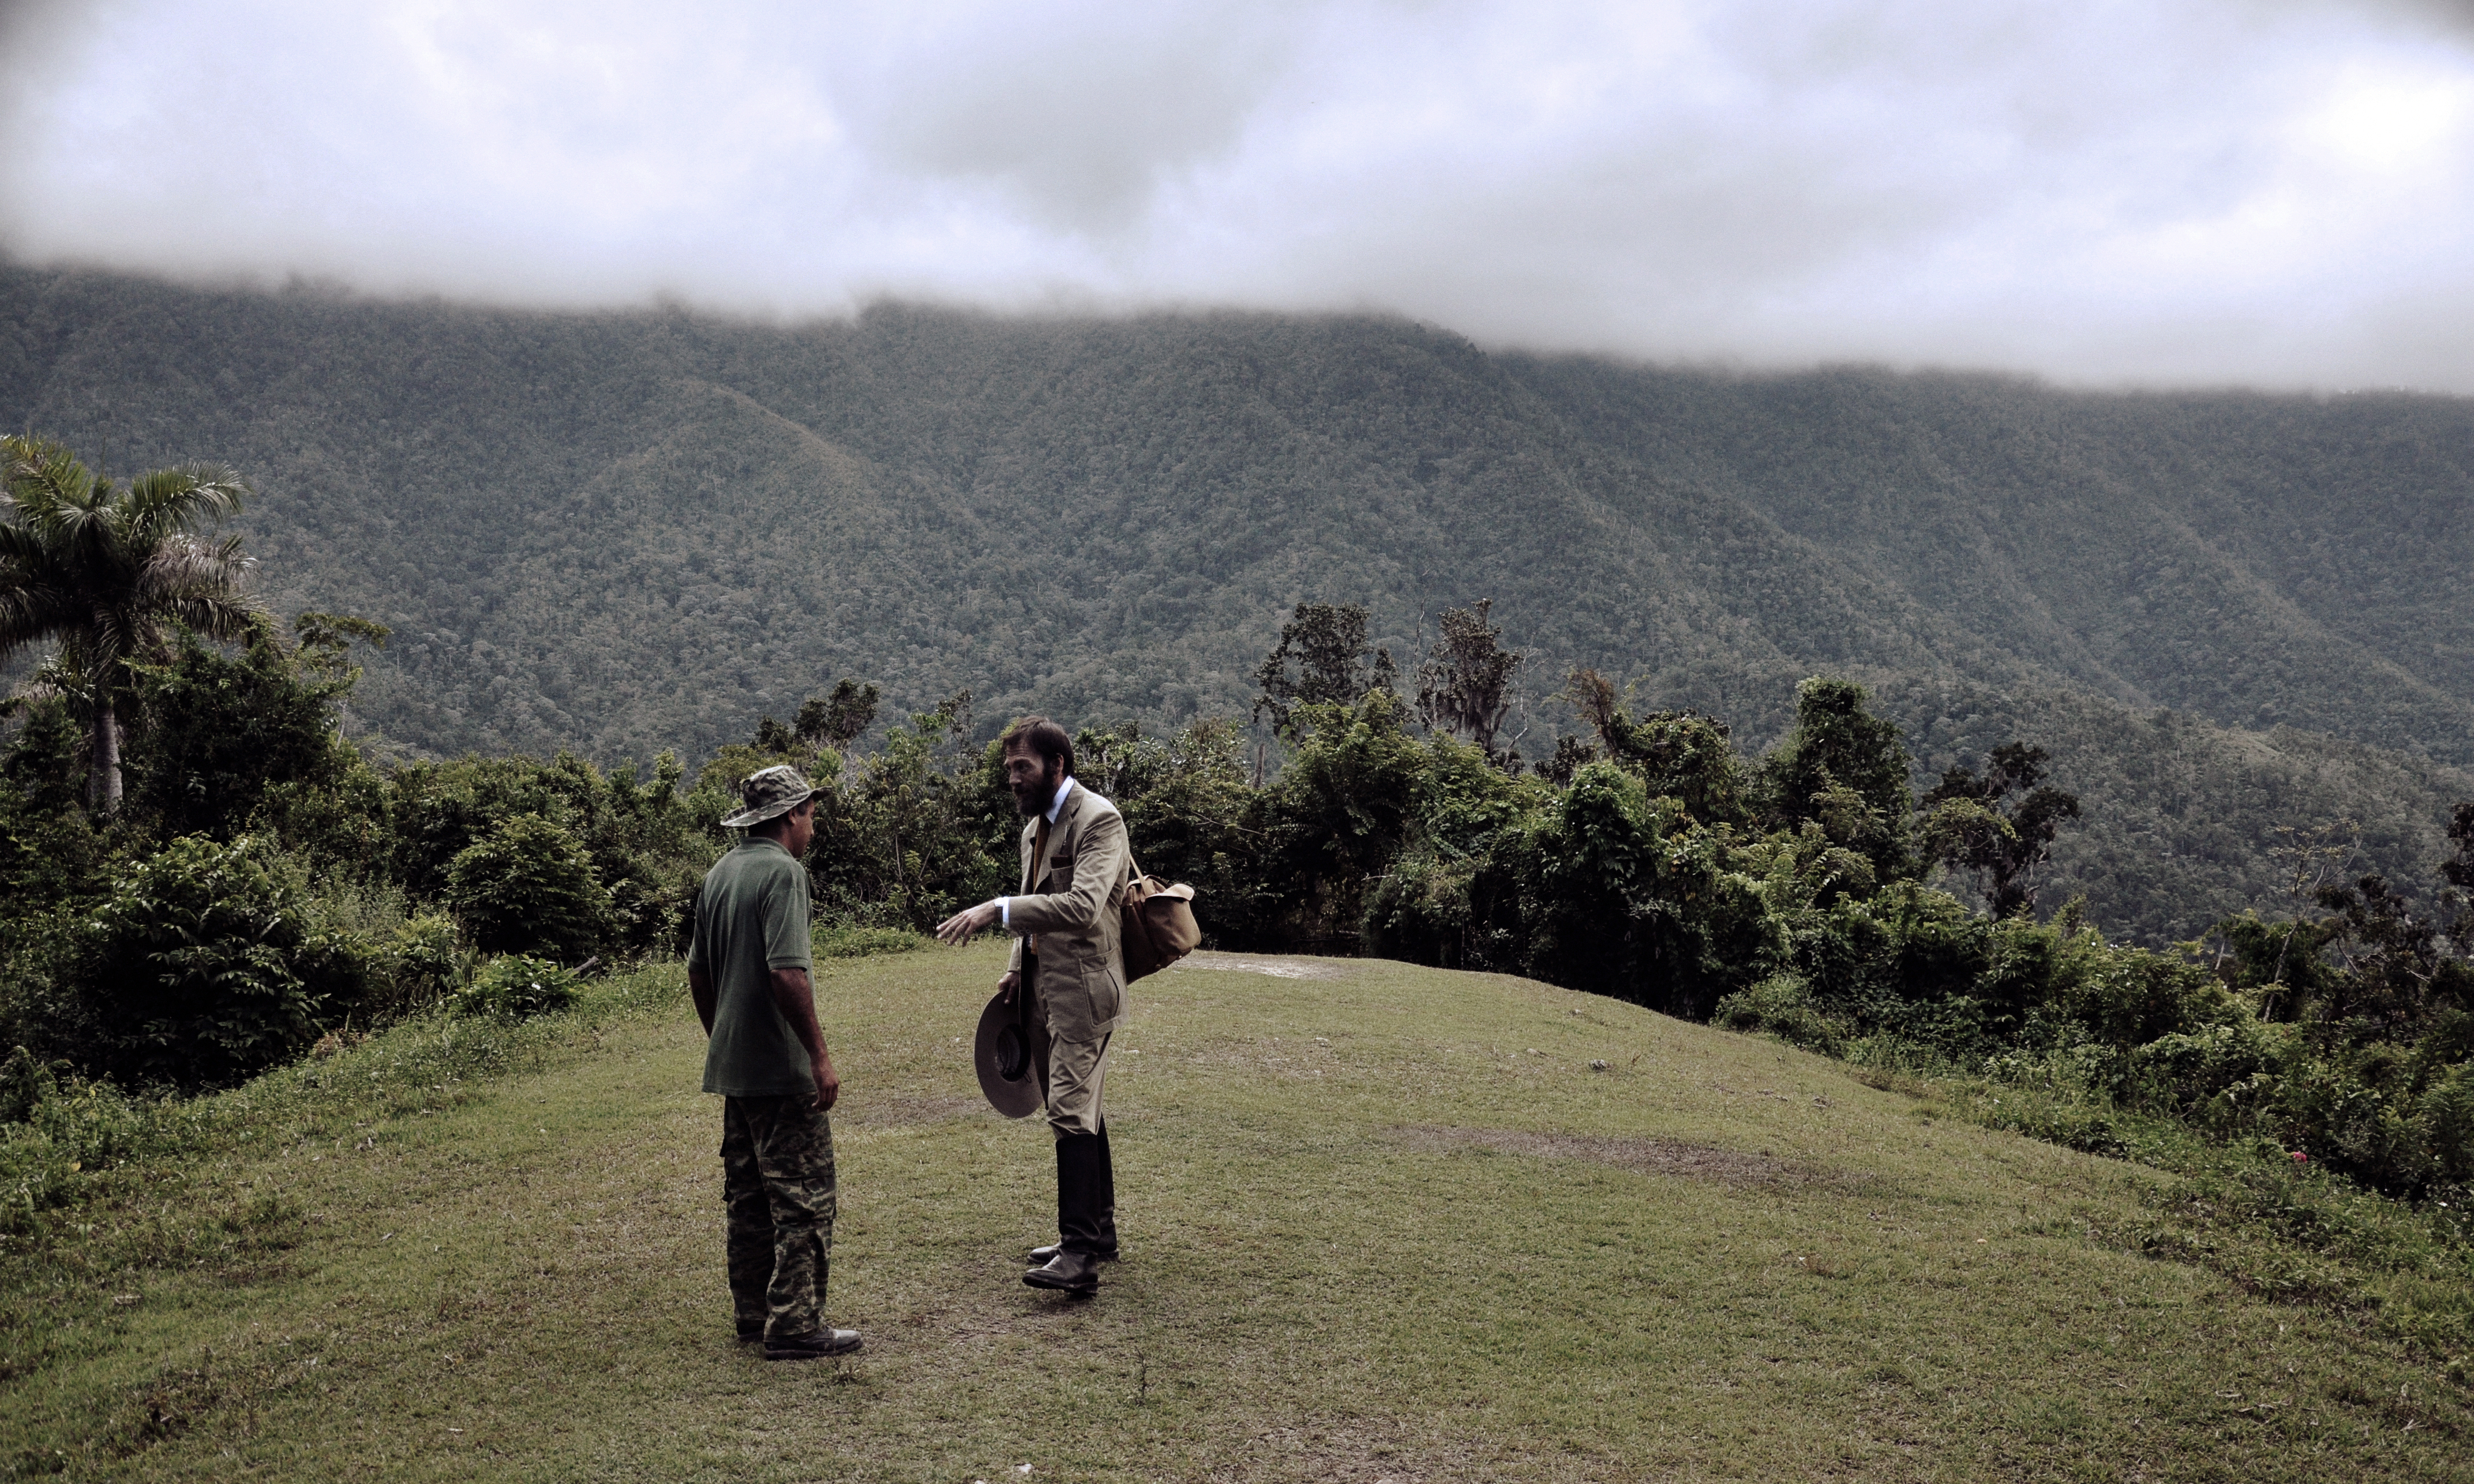 On the Sierra Maestra, Cuba 2009, during the shooting of SOY LA OTRA CUBA